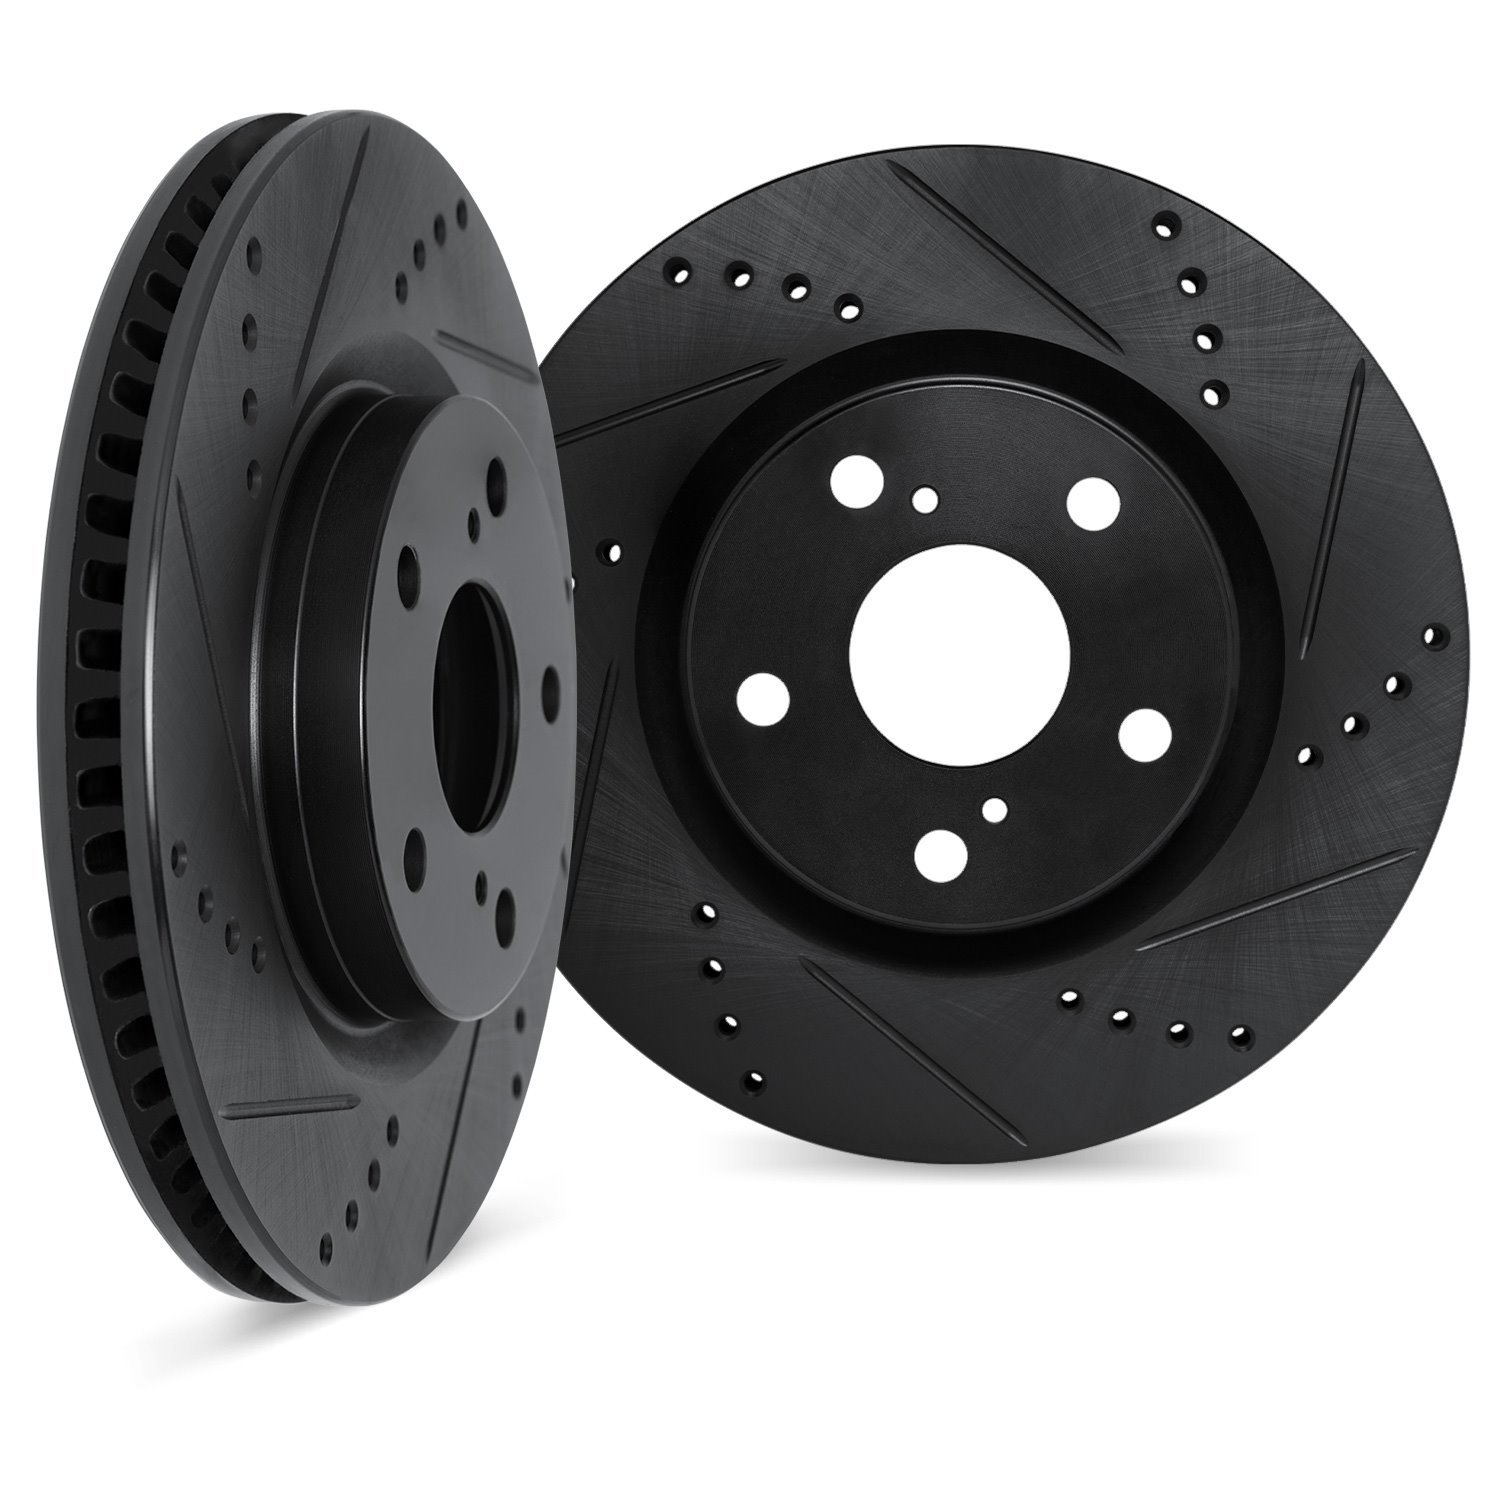 8002-58010 Drilled/Slotted Brake Rotors [Black], Fits Select Acura/Honda, Position: Front